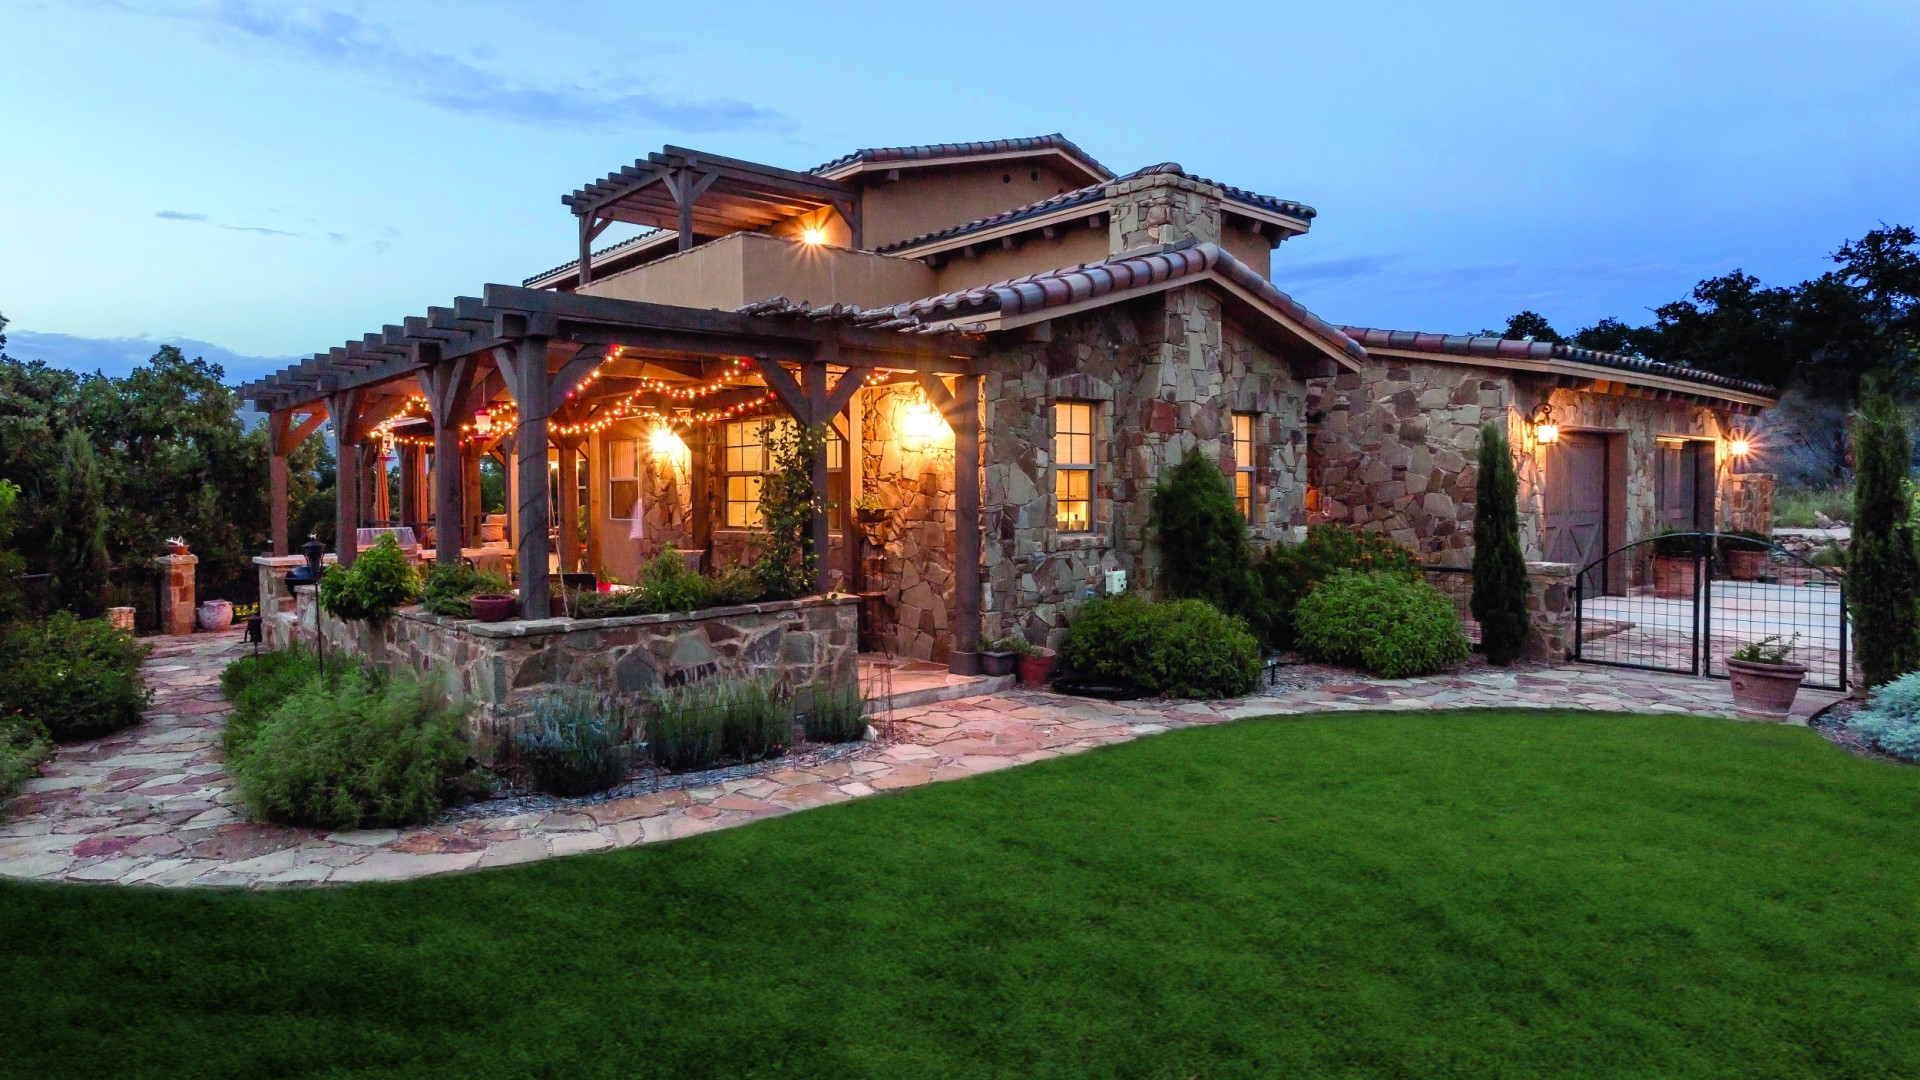 Beautifully designed stone home boasting a cozy outdoor living space, Lake LBJ TX